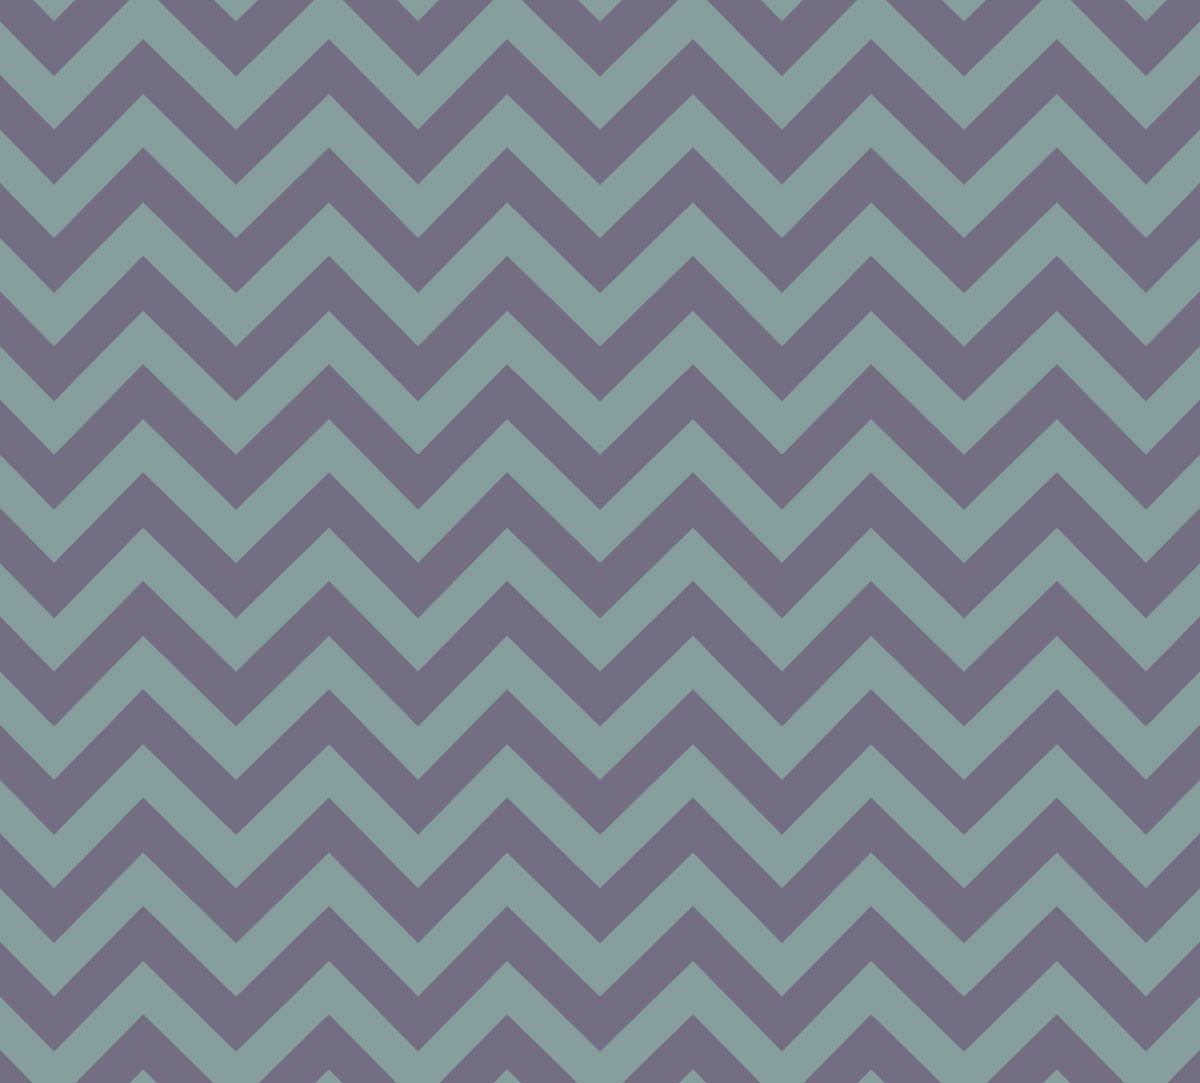 Chevron HD Wallpapers and Backgrounds